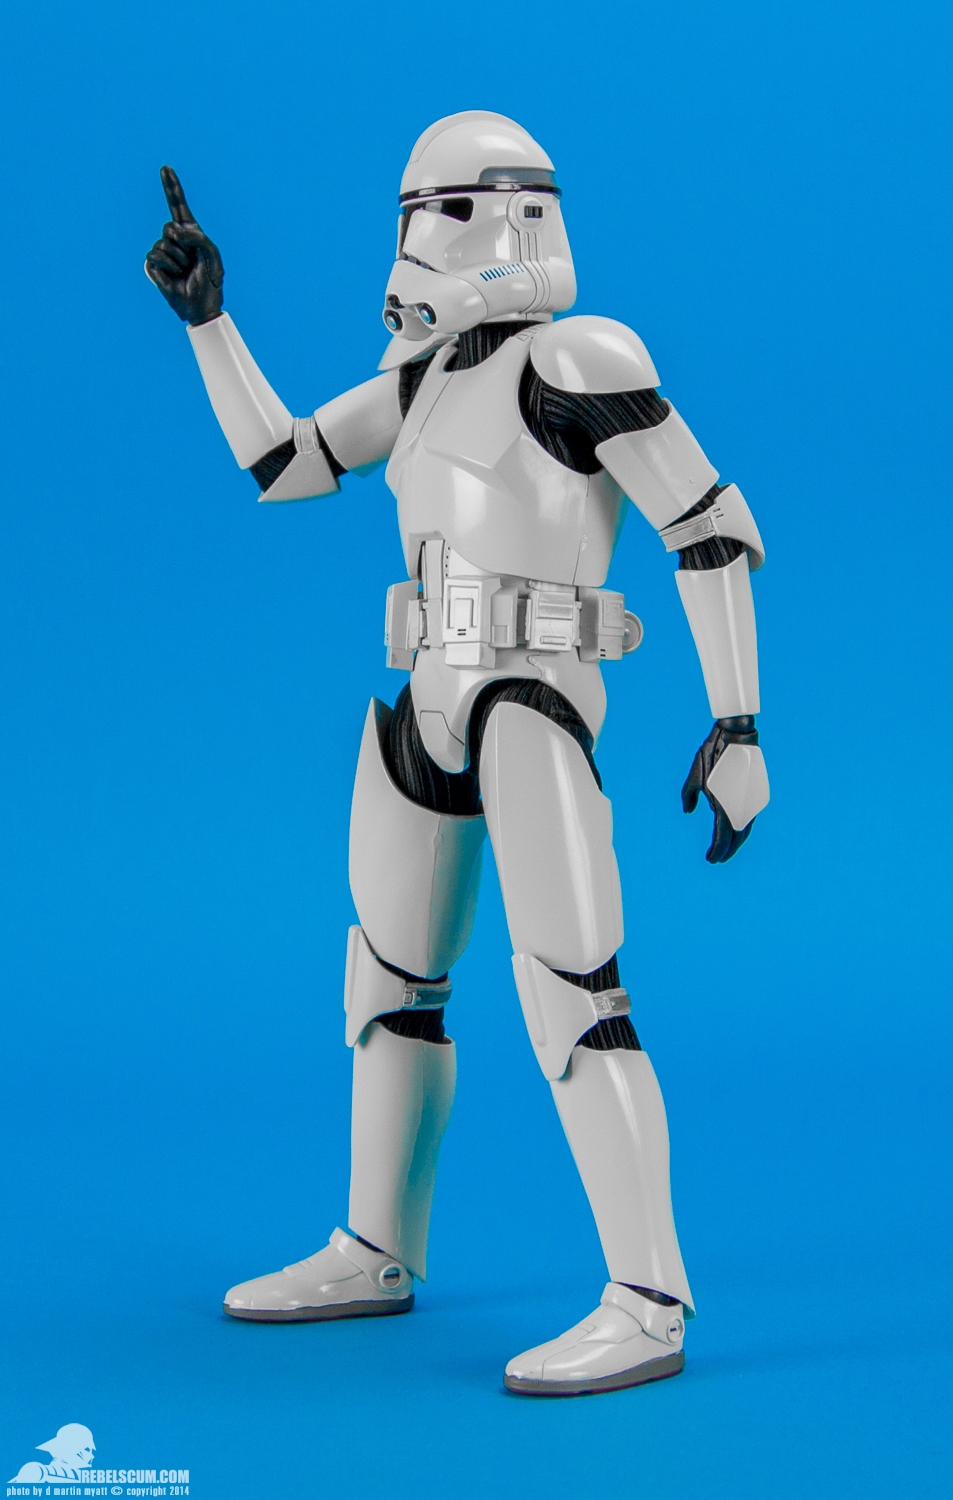 Shiny-Clone-Trooper-Deluxe-Sixth-Scale-Figure-Sideshow-007.jpg